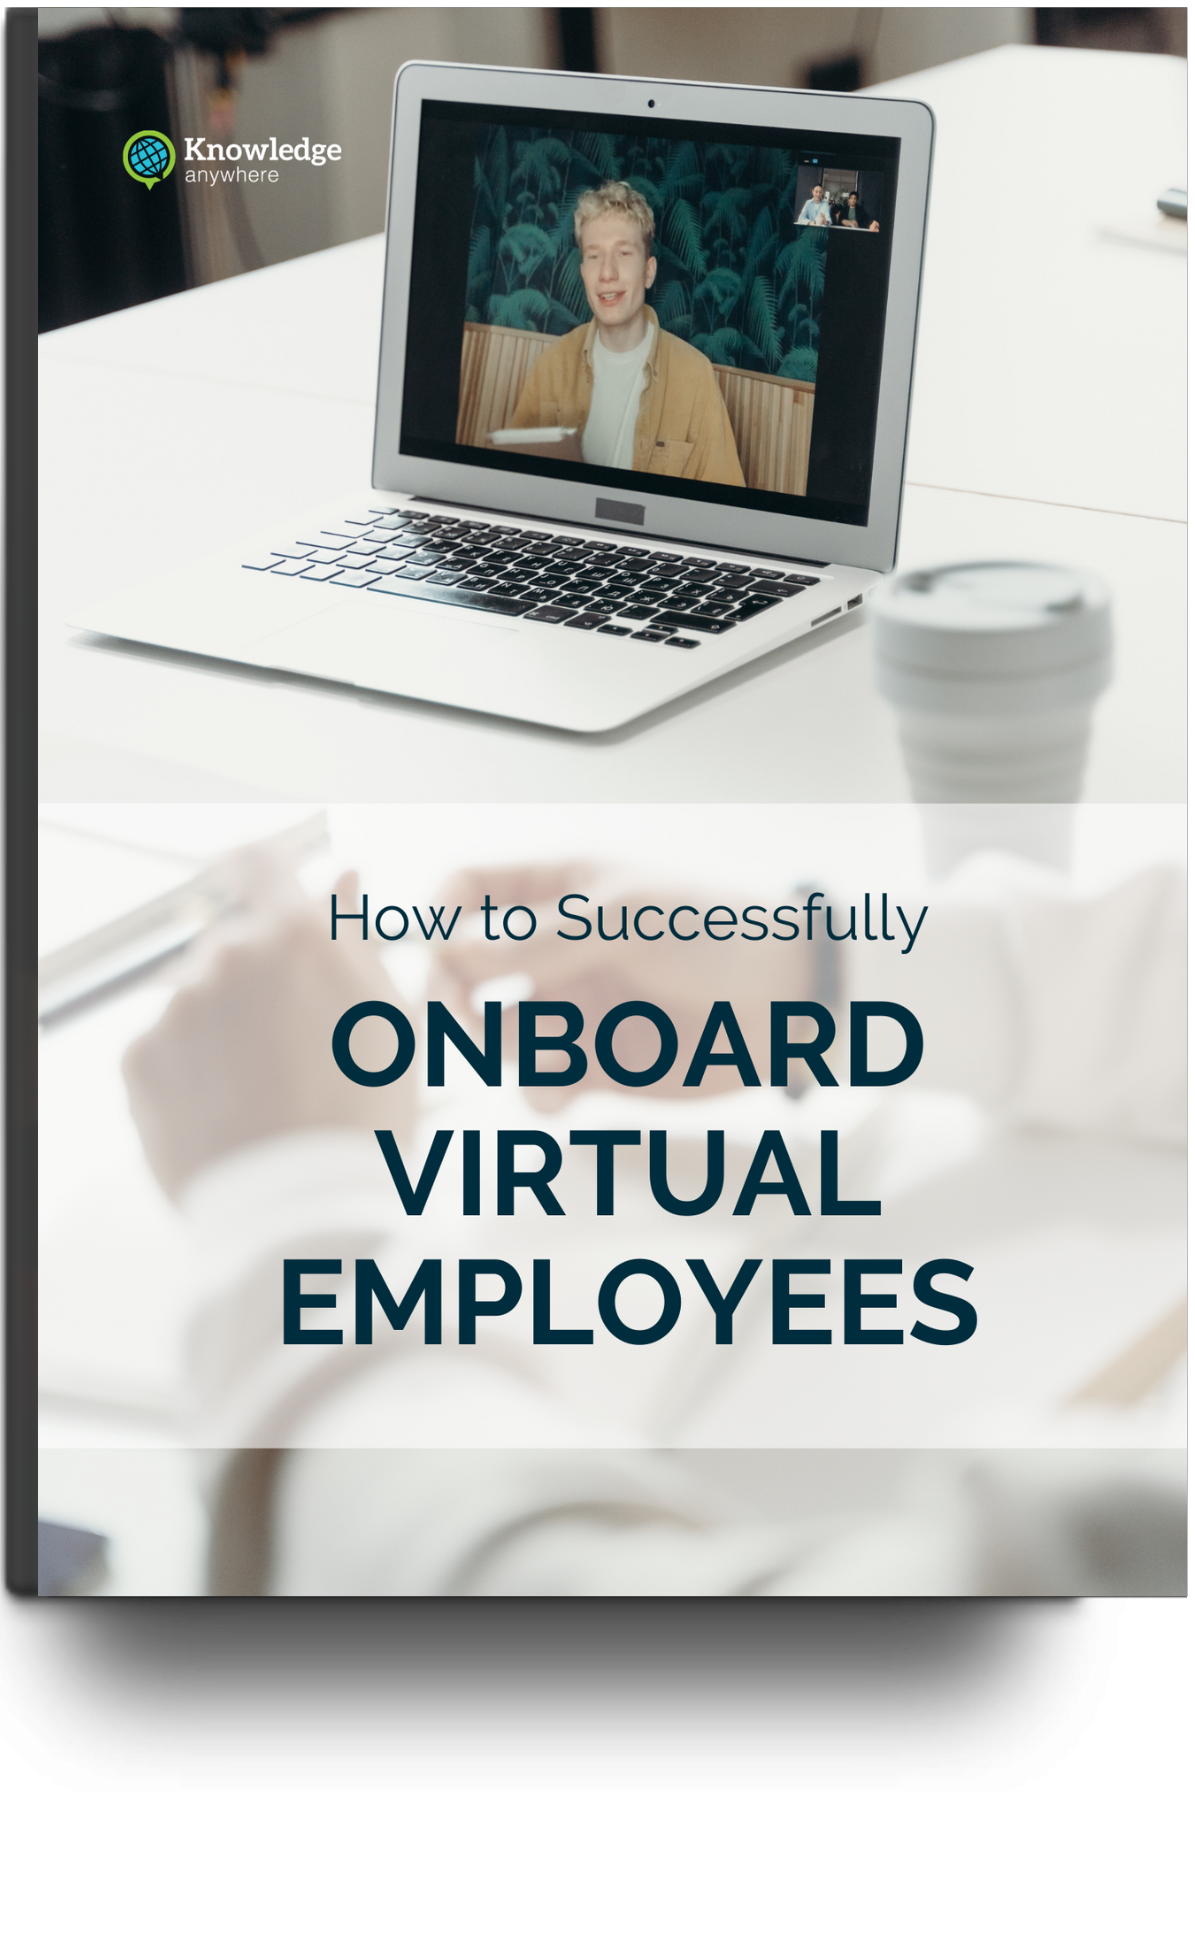 How to Successfully Onboard Virtual Employees